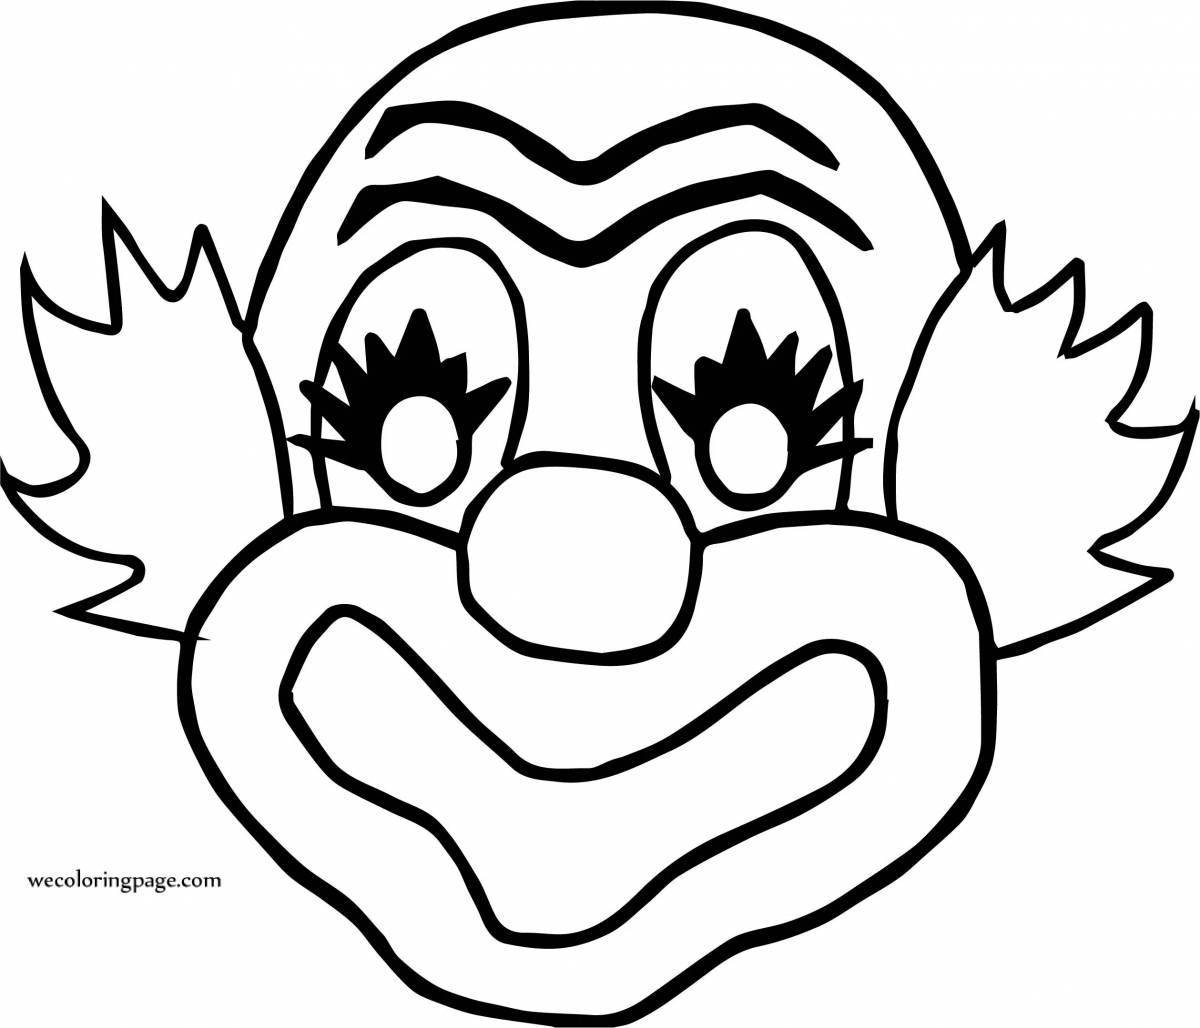 Colouring funny clown